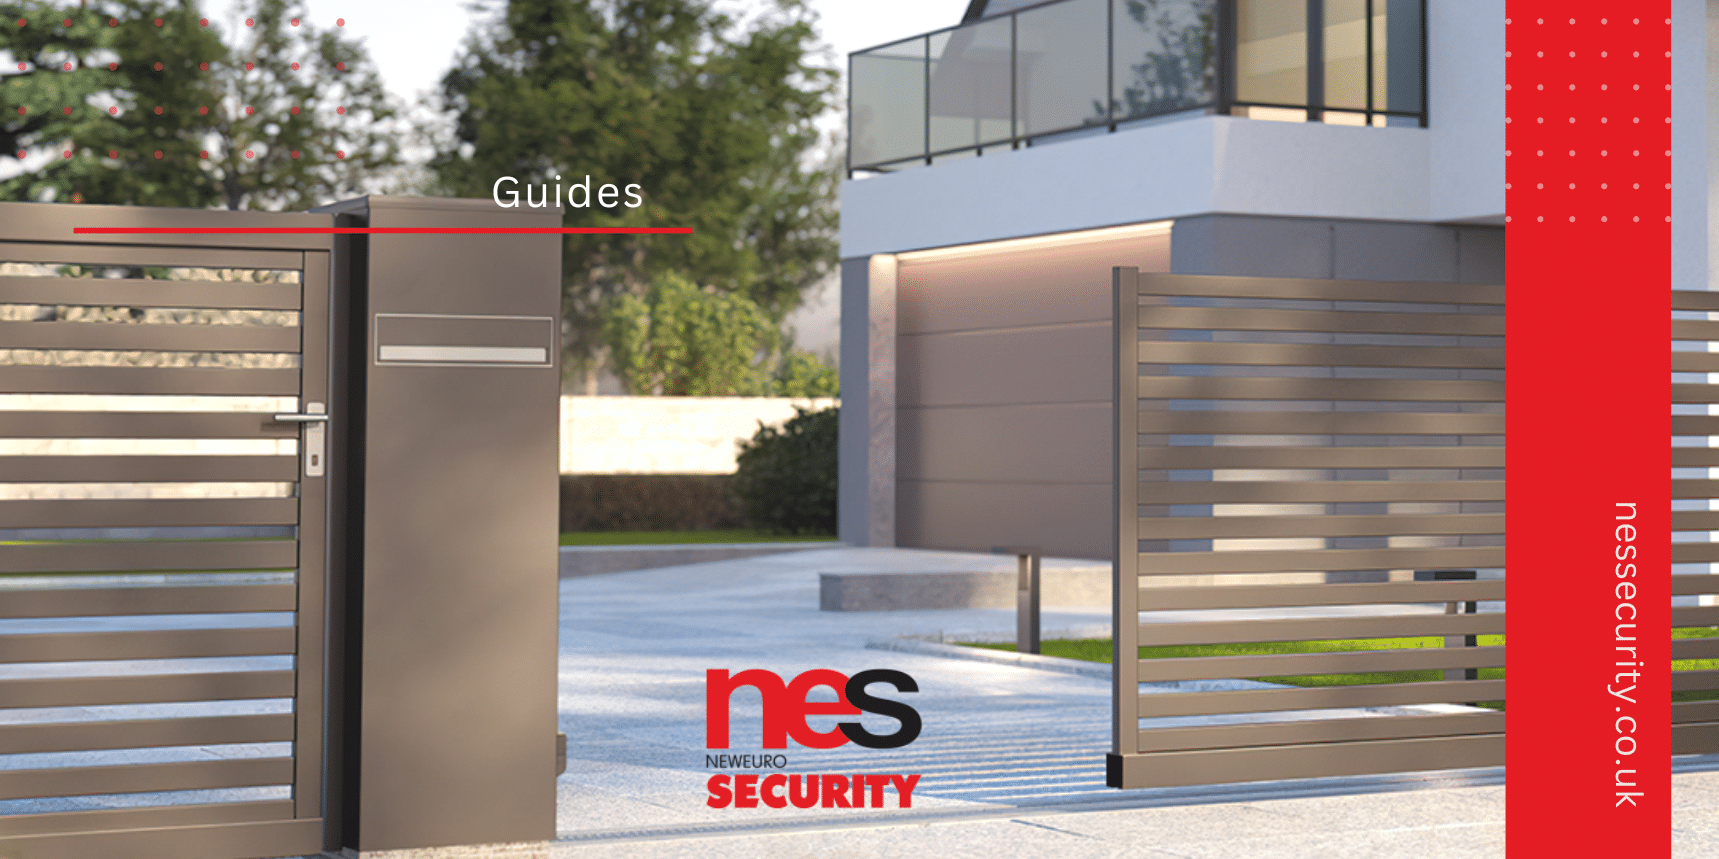 Access Control Systems for Gates UK